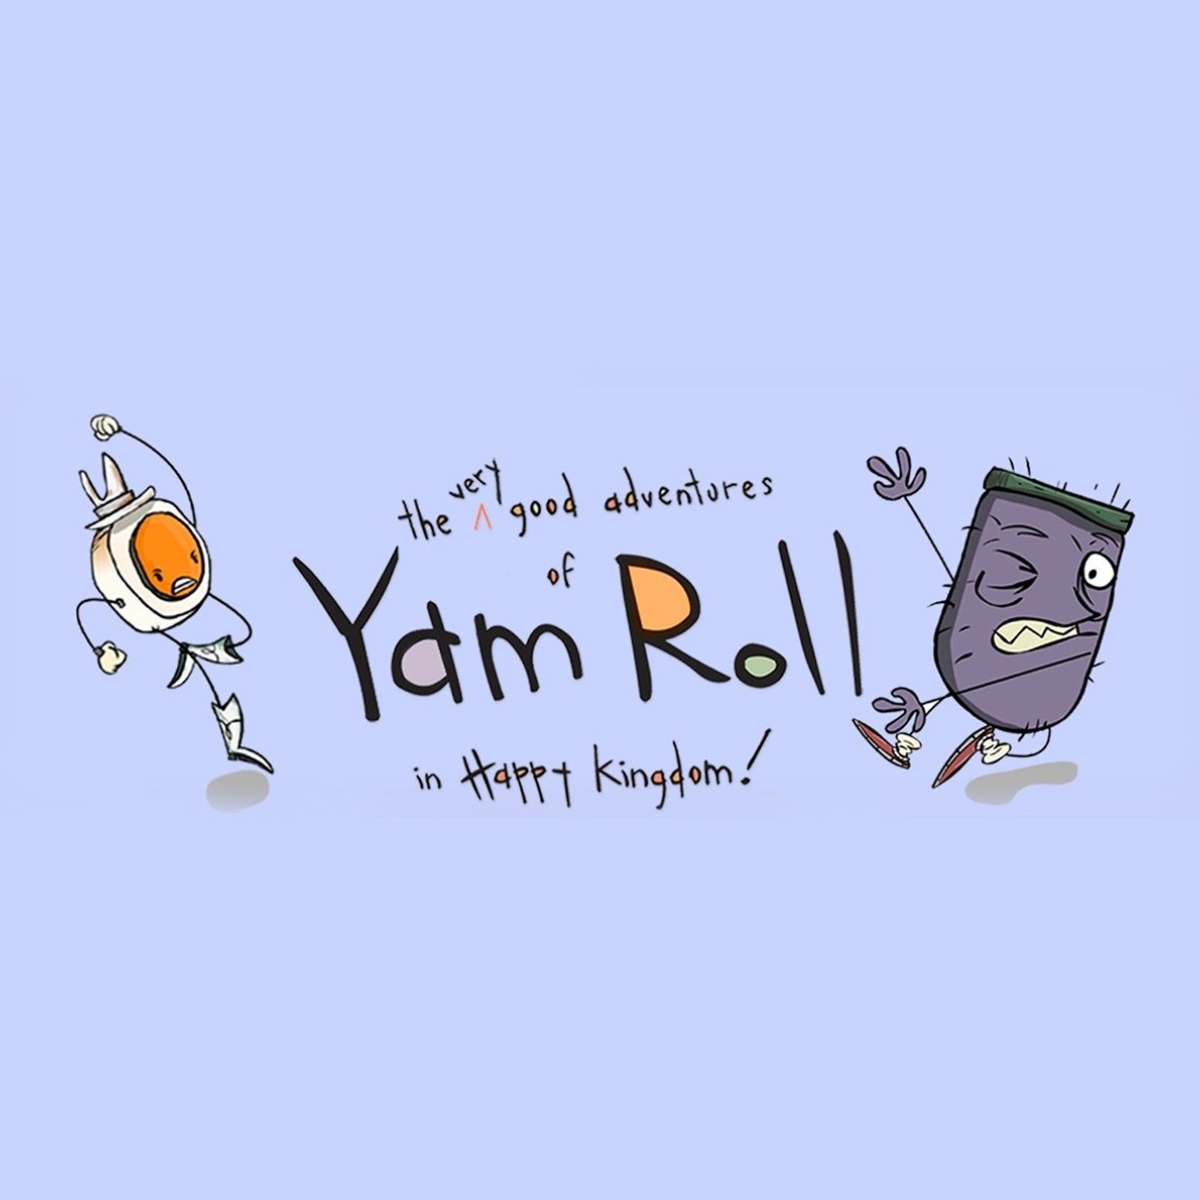 15-facts-about-yam-roll-yam-roll